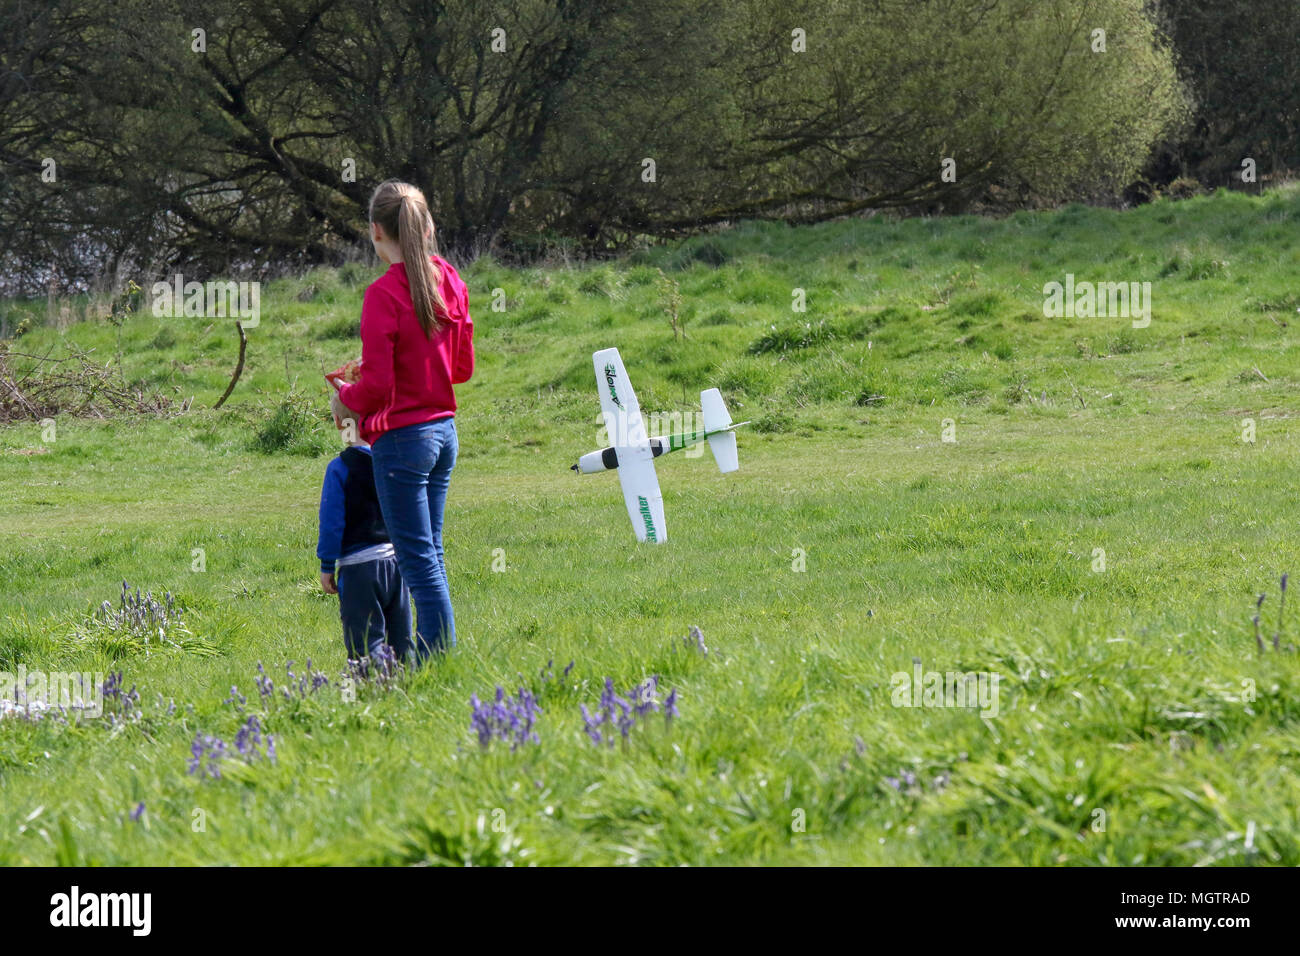 Oxford Island, Lough Neagh, Northern Ireland. 29 April 2018. UK weather - a very pleasant spring day saw temperatures up to 13C at the southern shore of Lough Neagh. A day for learning to get to grips with a model plane as this Skywalker Axion RC model plane crashes to the ground. Credit: David Hunter/Alamy Live News. Stock Photo